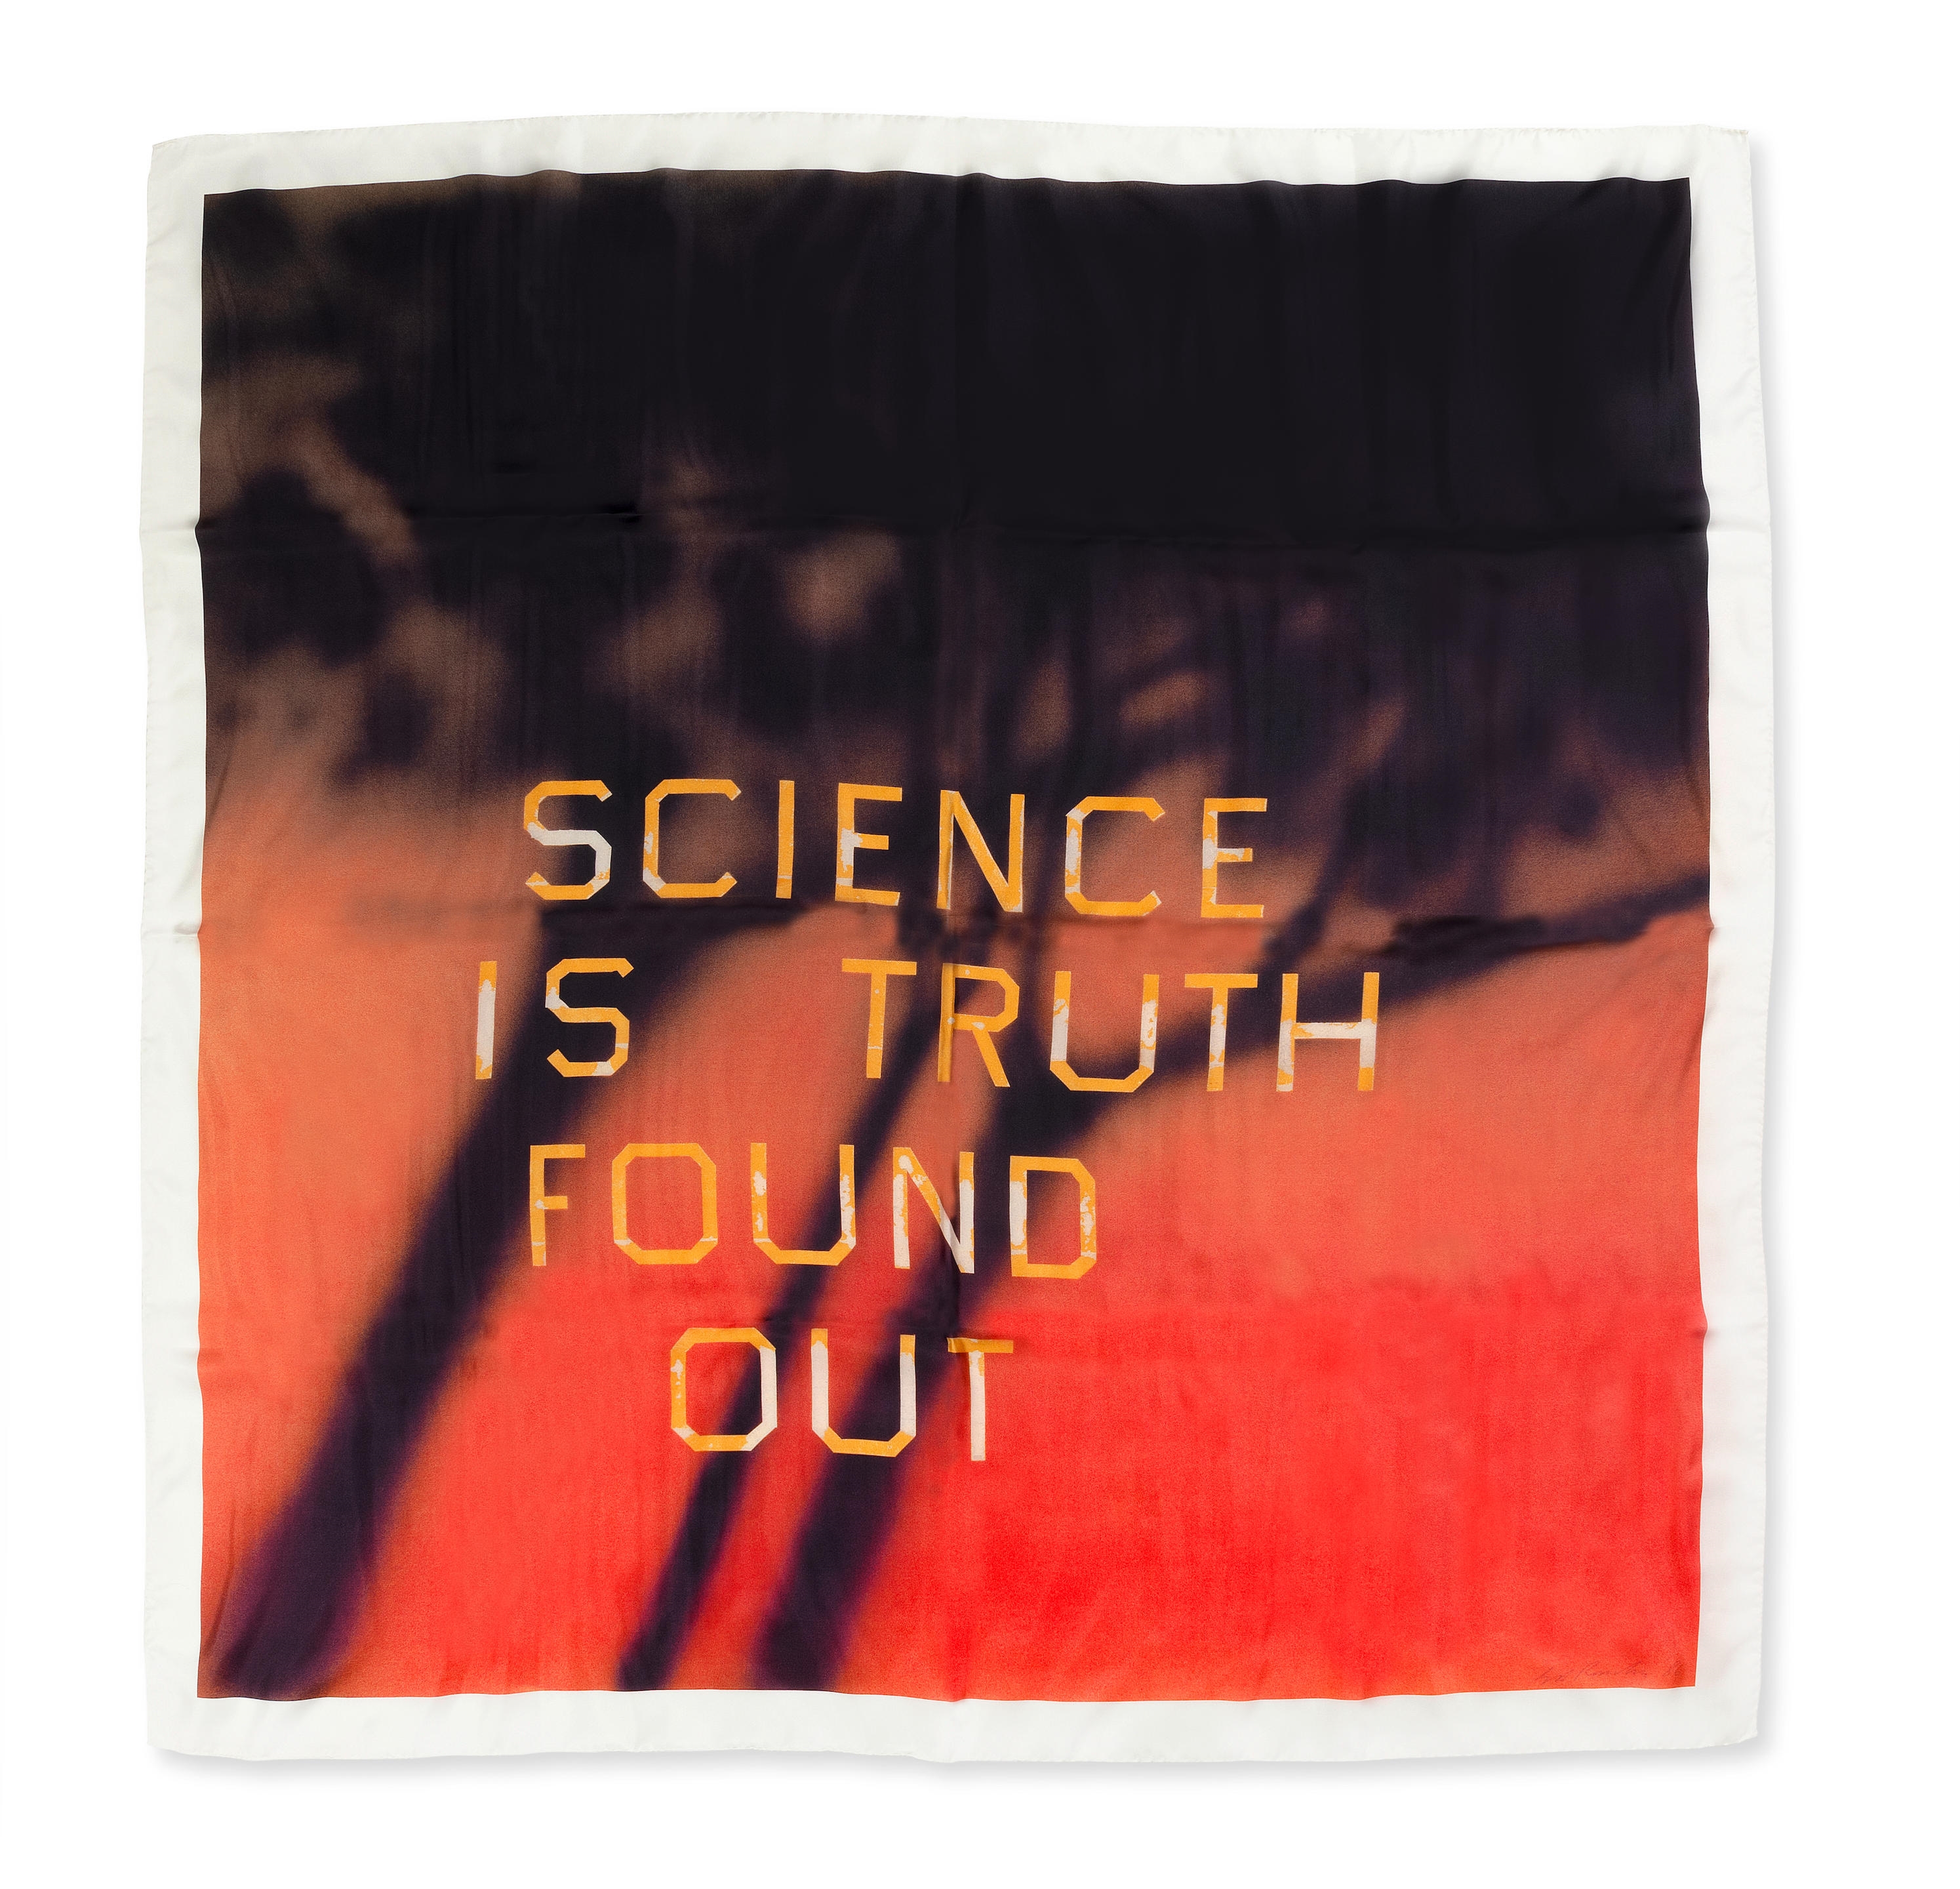 Science Is Truth Found Out (Red Scarf - Ed Ruscha